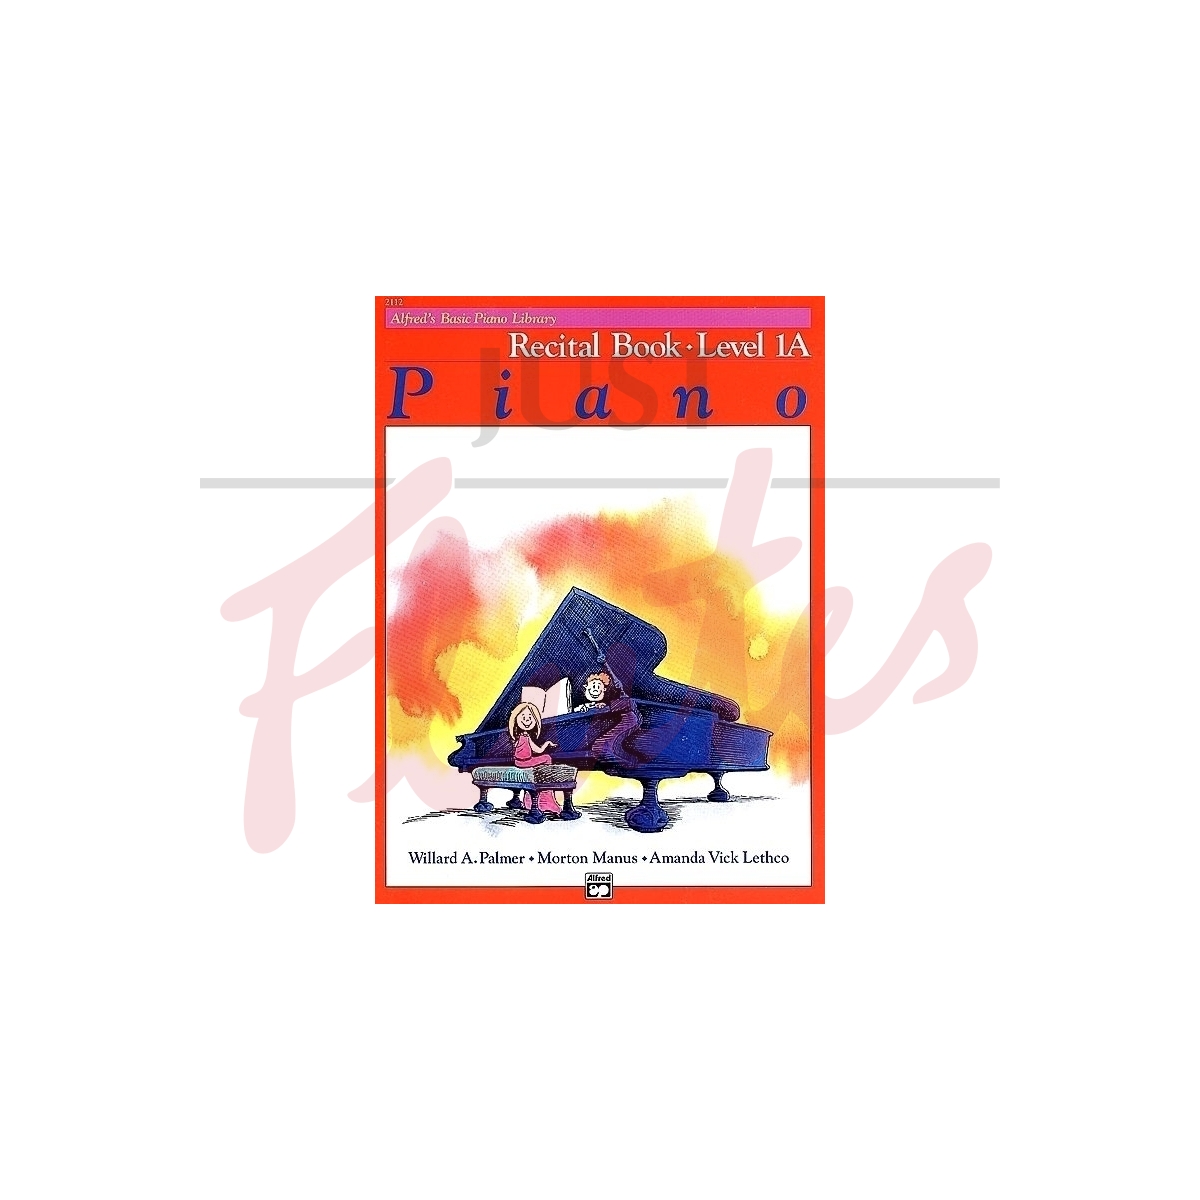 Alfred's Basic Piano Library: Recital Book Level 1A